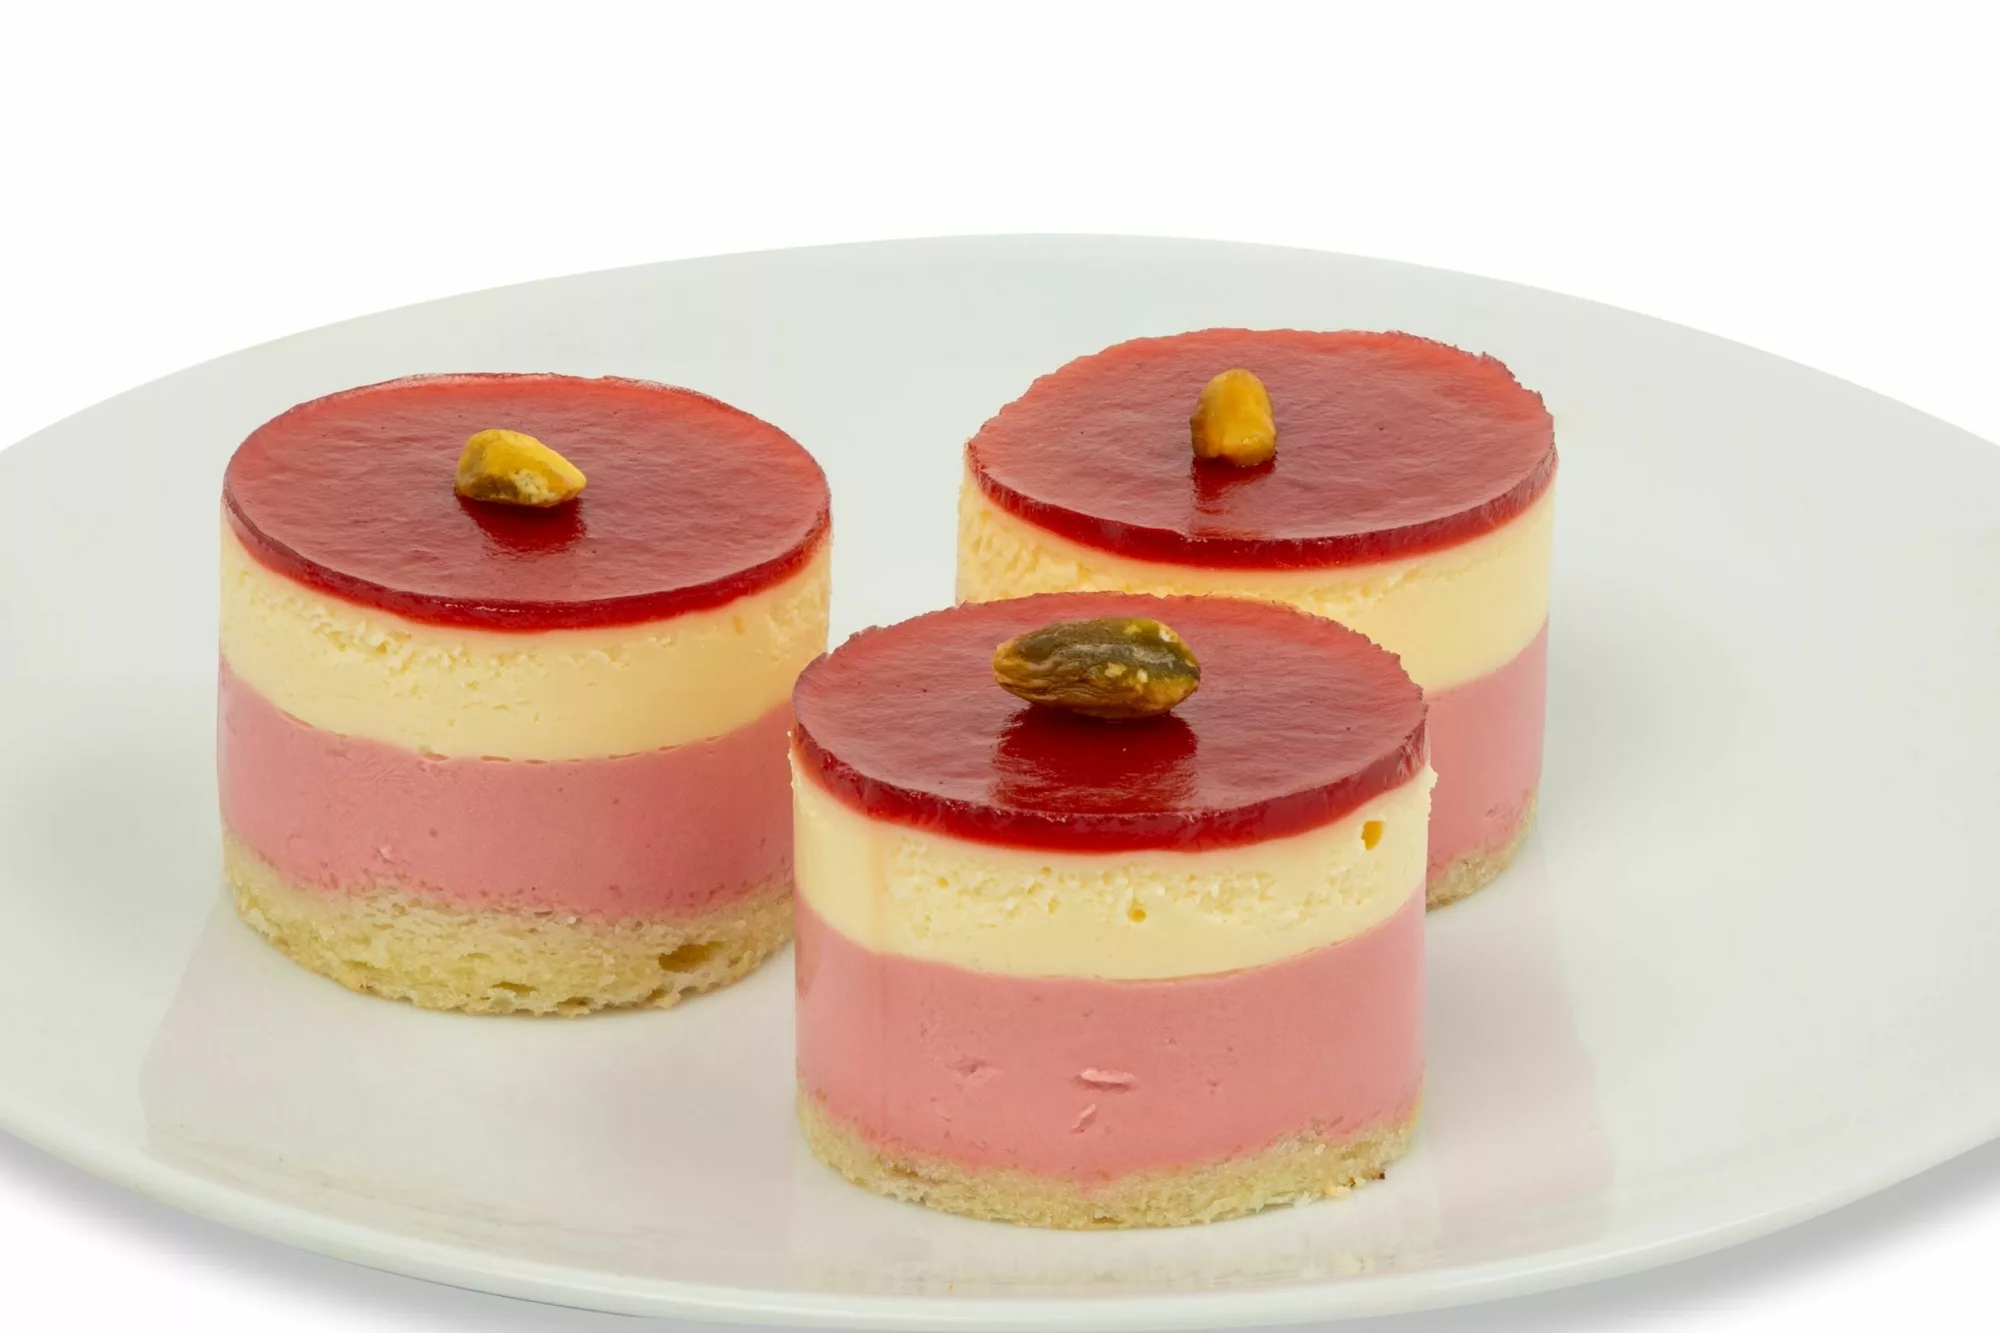 Raspberry and mascarpone mousse over chiffon sponge cake. Includes 6 pieces.